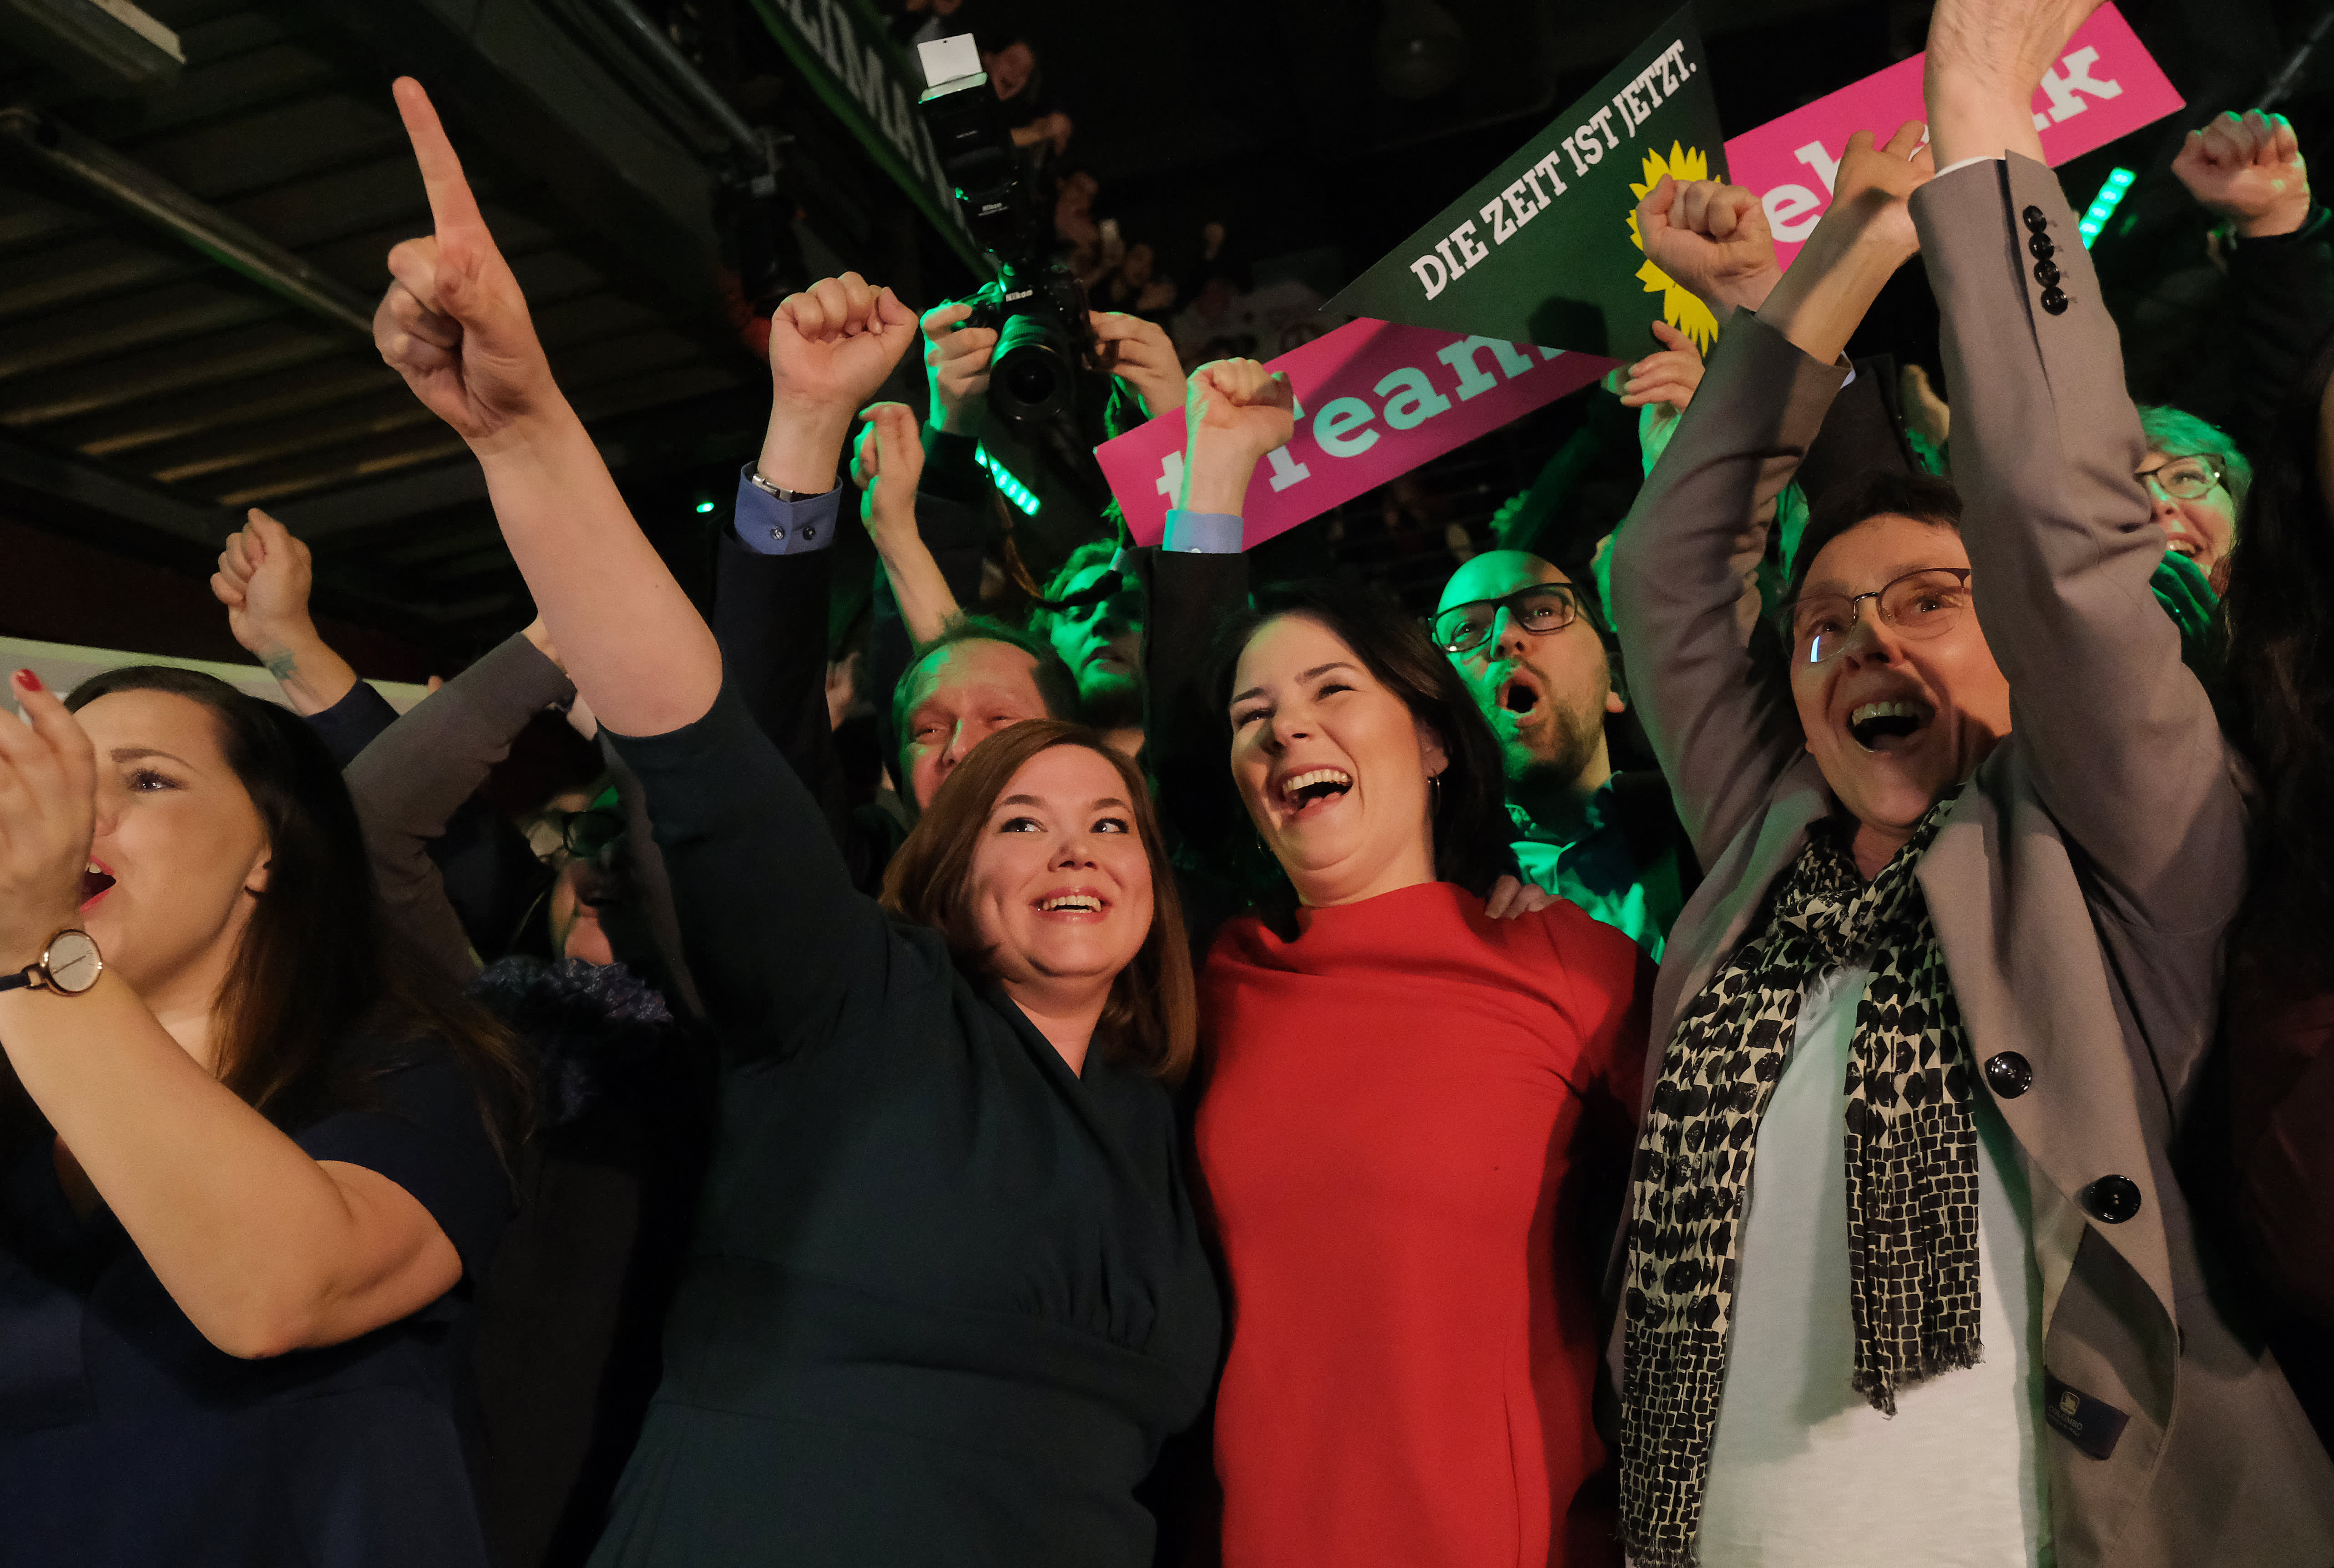 The Greens were once favorites ahead of Germany’s ‘rollercoaster’ election, but not anymore